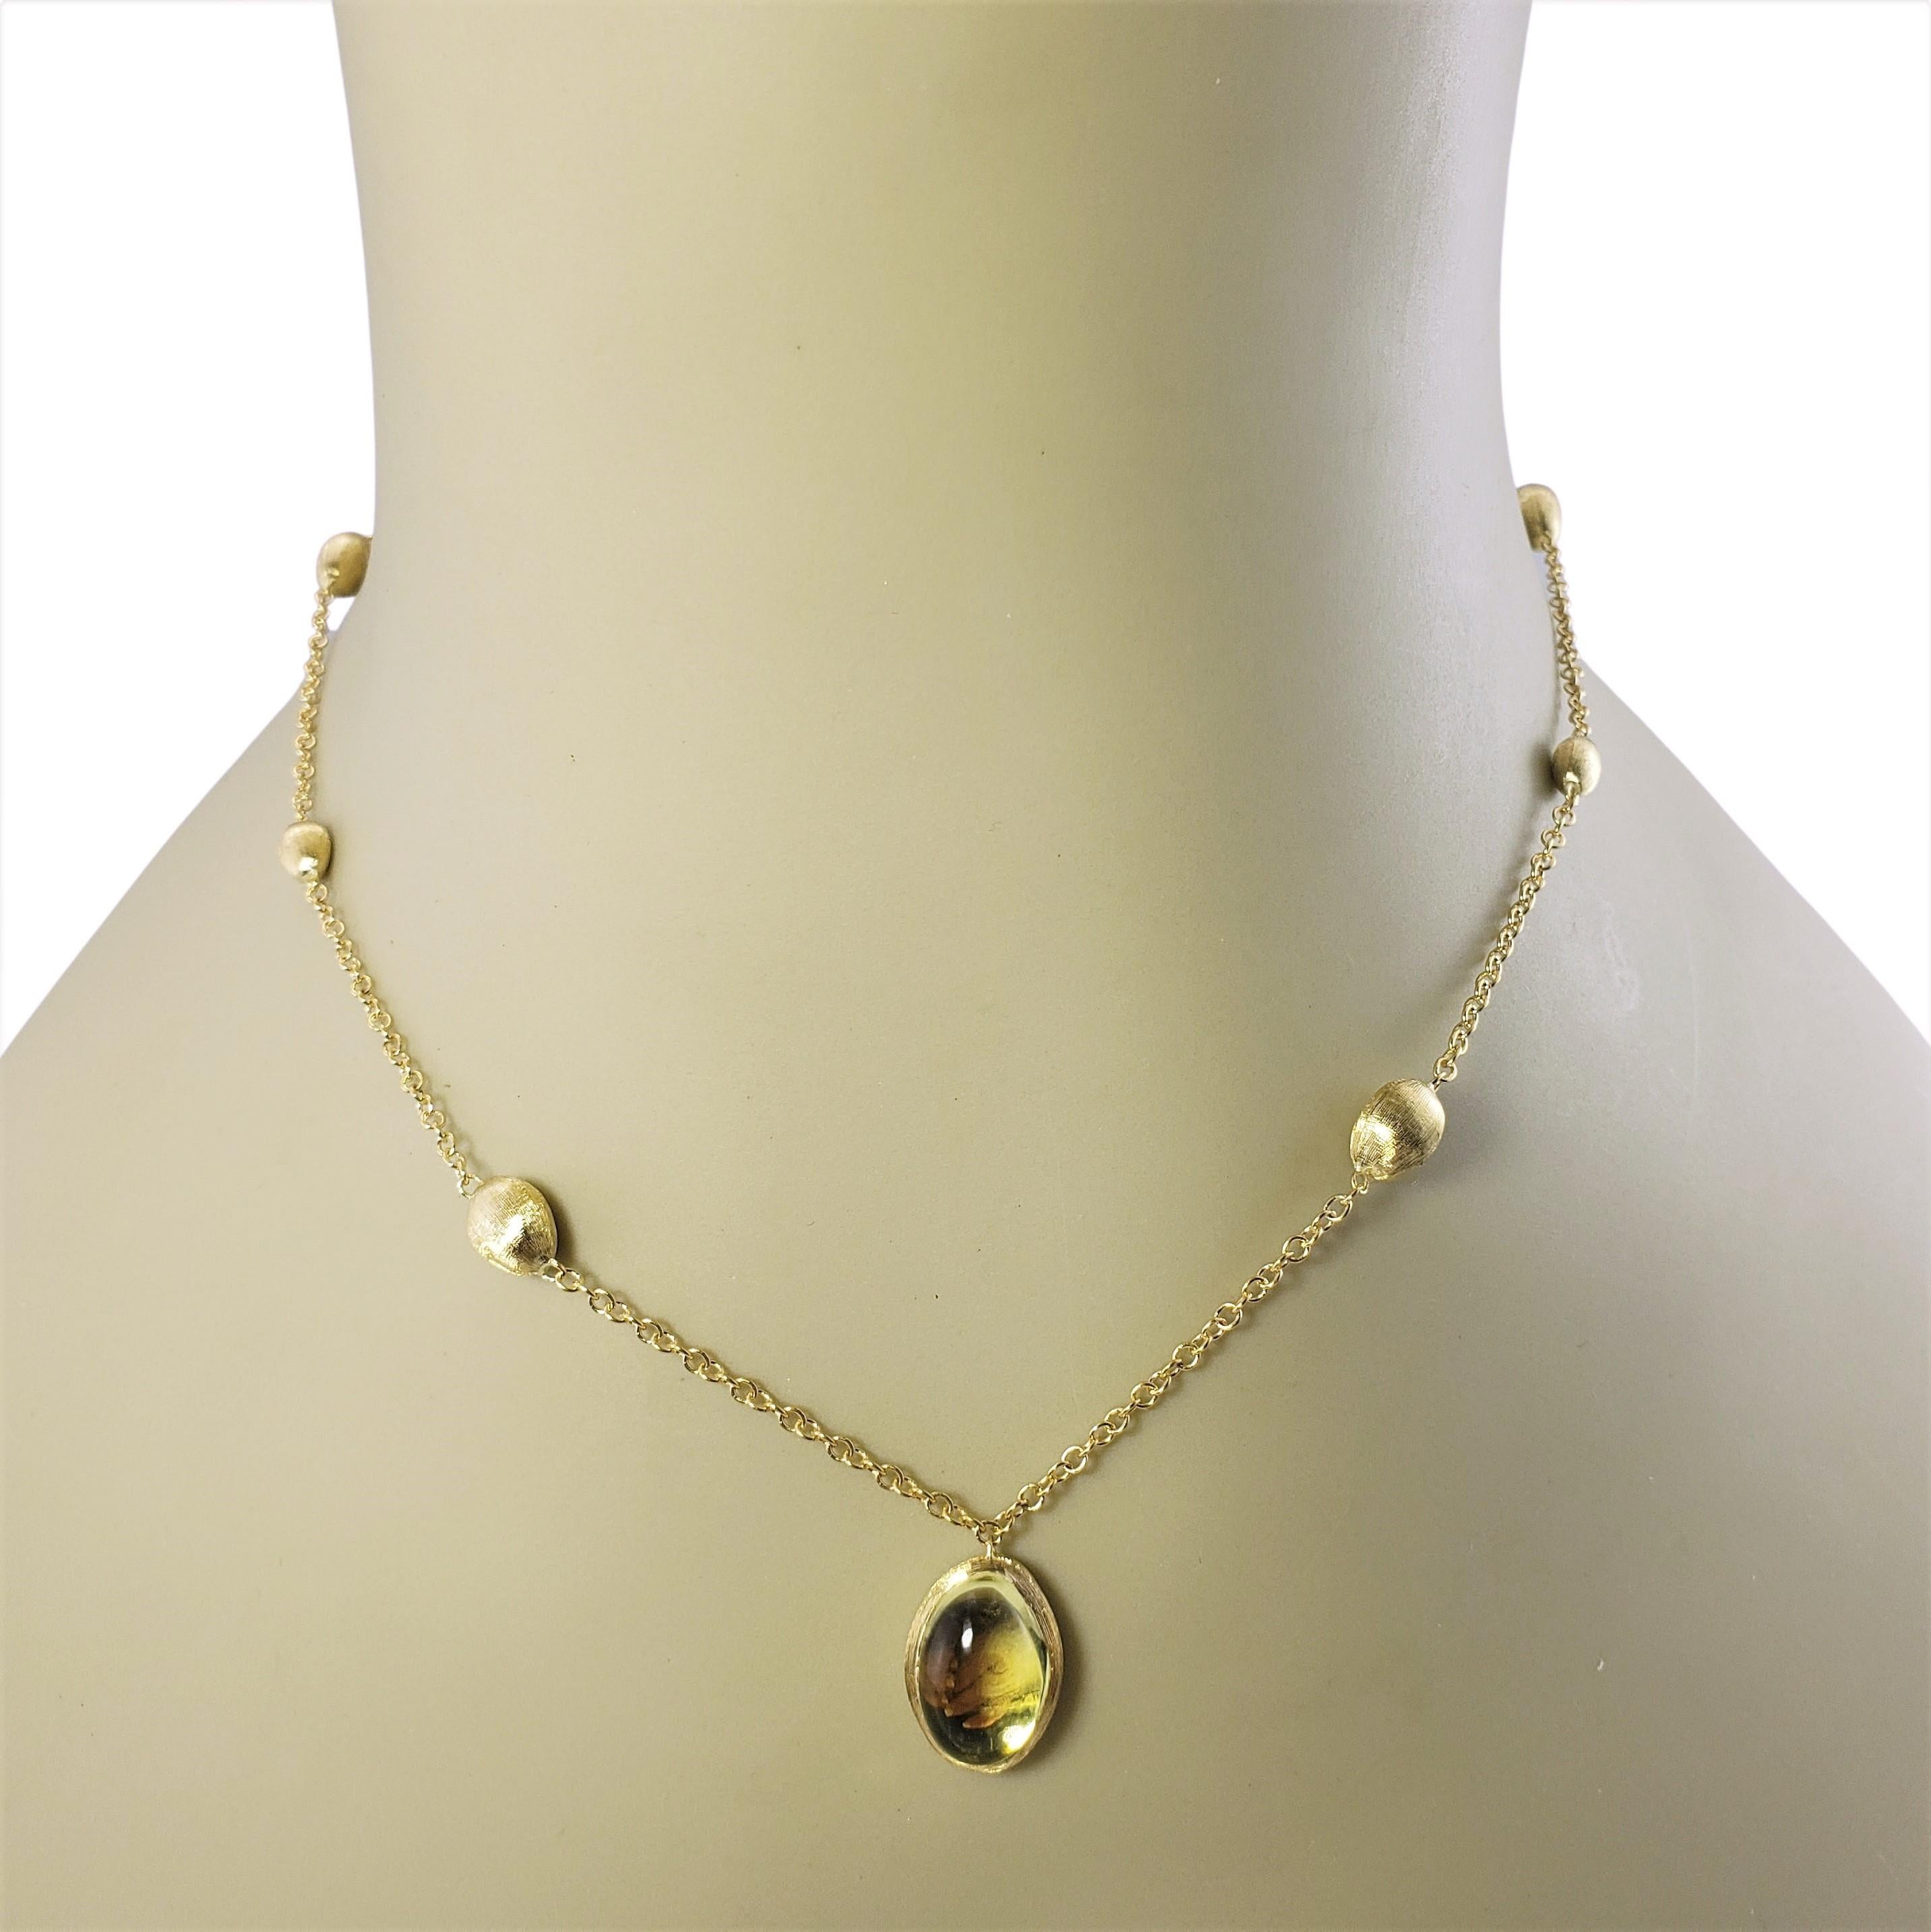 Marco Bicego 18 Karat Yellow Gold and Citrine Necklace For Sale 2